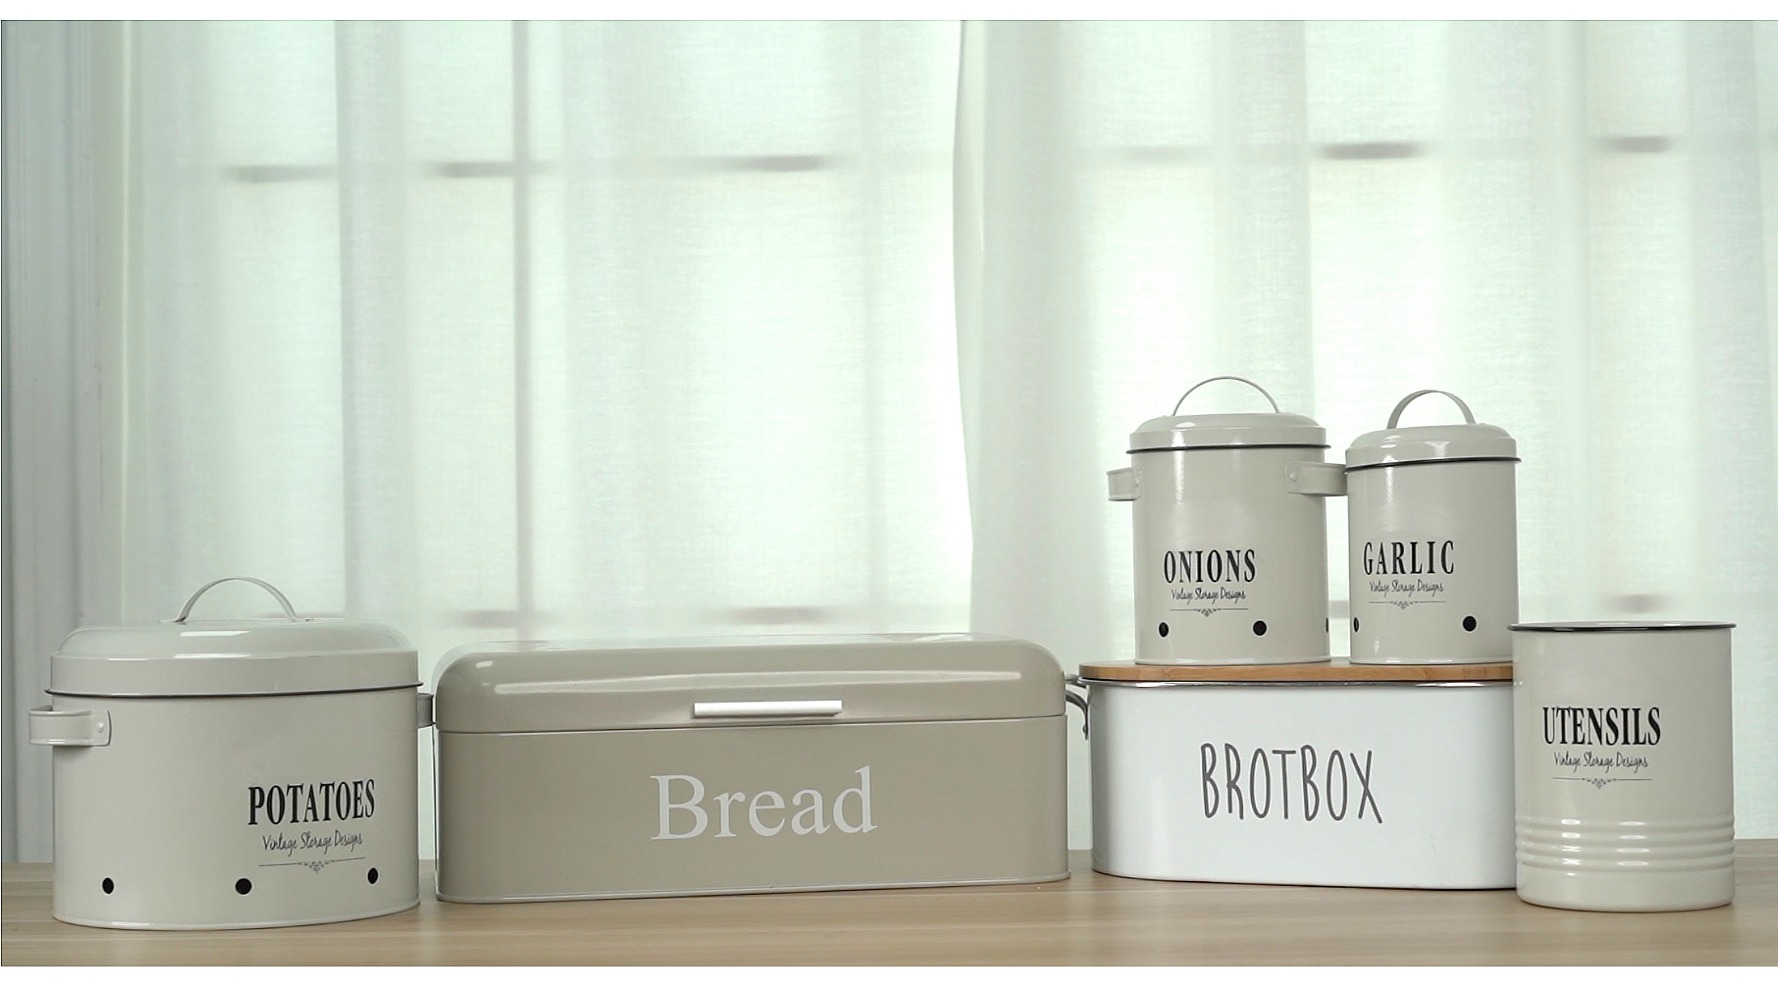 Great to enhance the look of your kitchen with character and some country decor.  DECORATIVE LARGE TINS - Stylish and decorative canisters designed for Sugar, Coffee and Tea storage. Ideal for dry food and goods, this rustic canister set will complete you